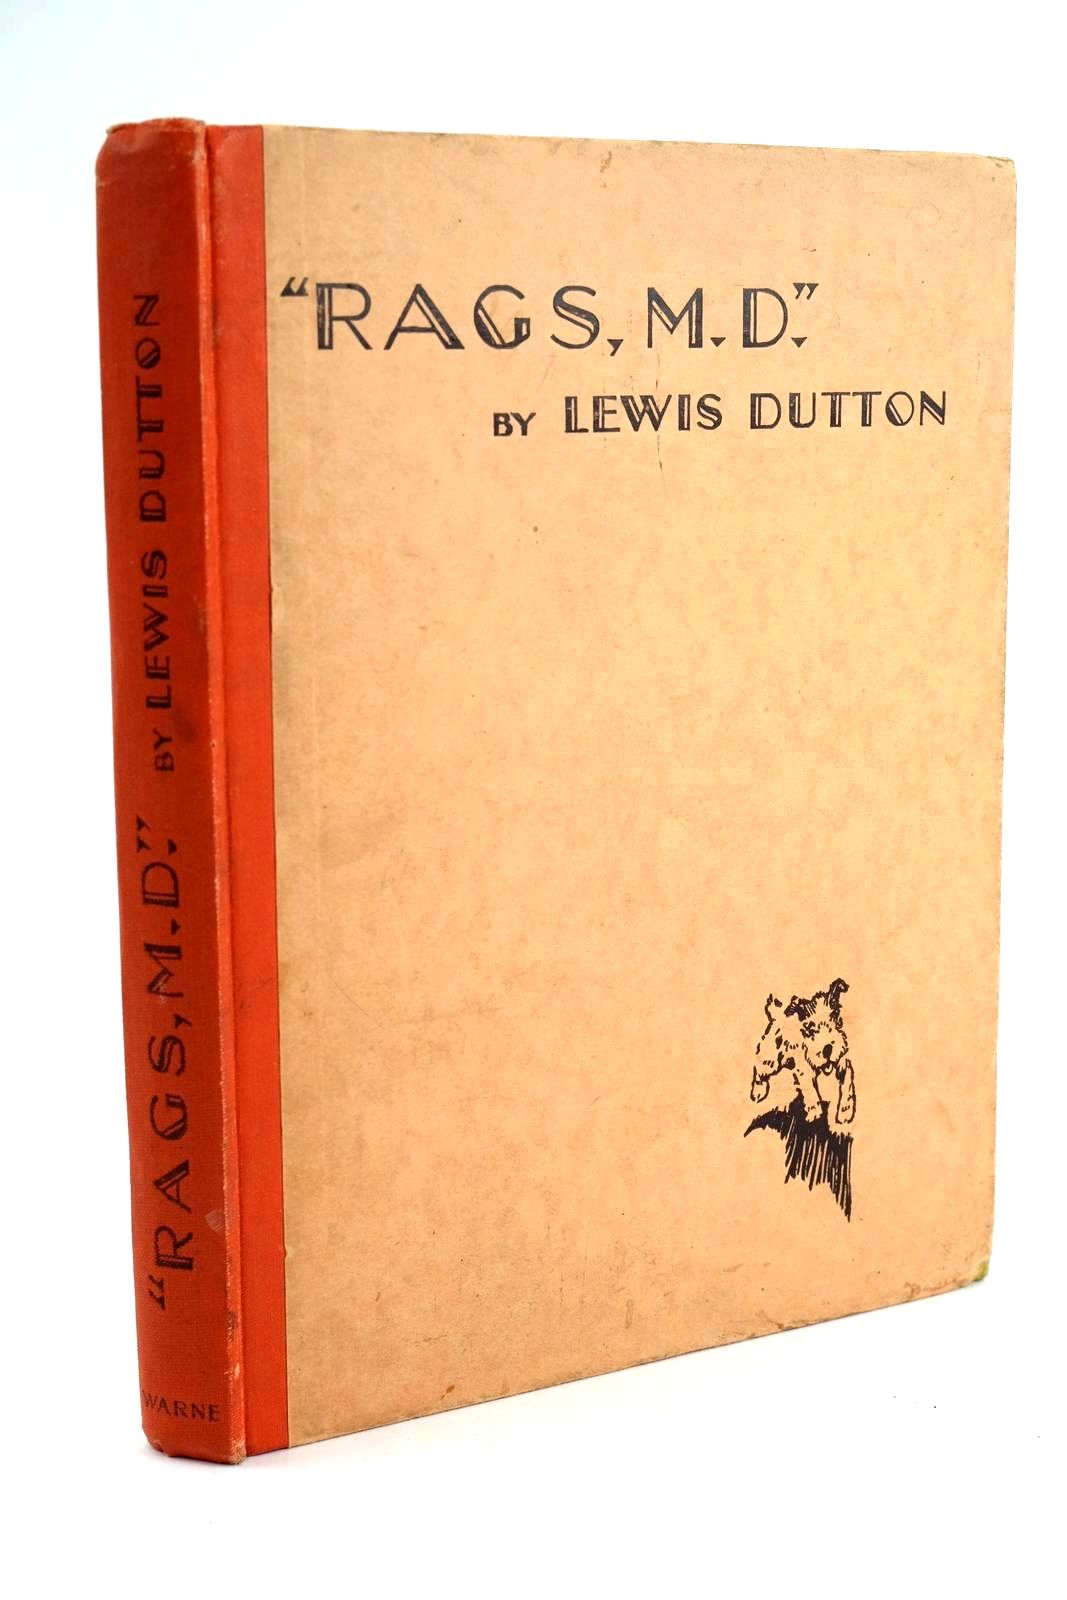 Photo of RAGS, M.D. written by Dutton, Lewis illustrated by Norfield, Edgar published by Frederick Warne & Co Ltd. (STOCK CODE: 1323392)  for sale by Stella & Rose's Books